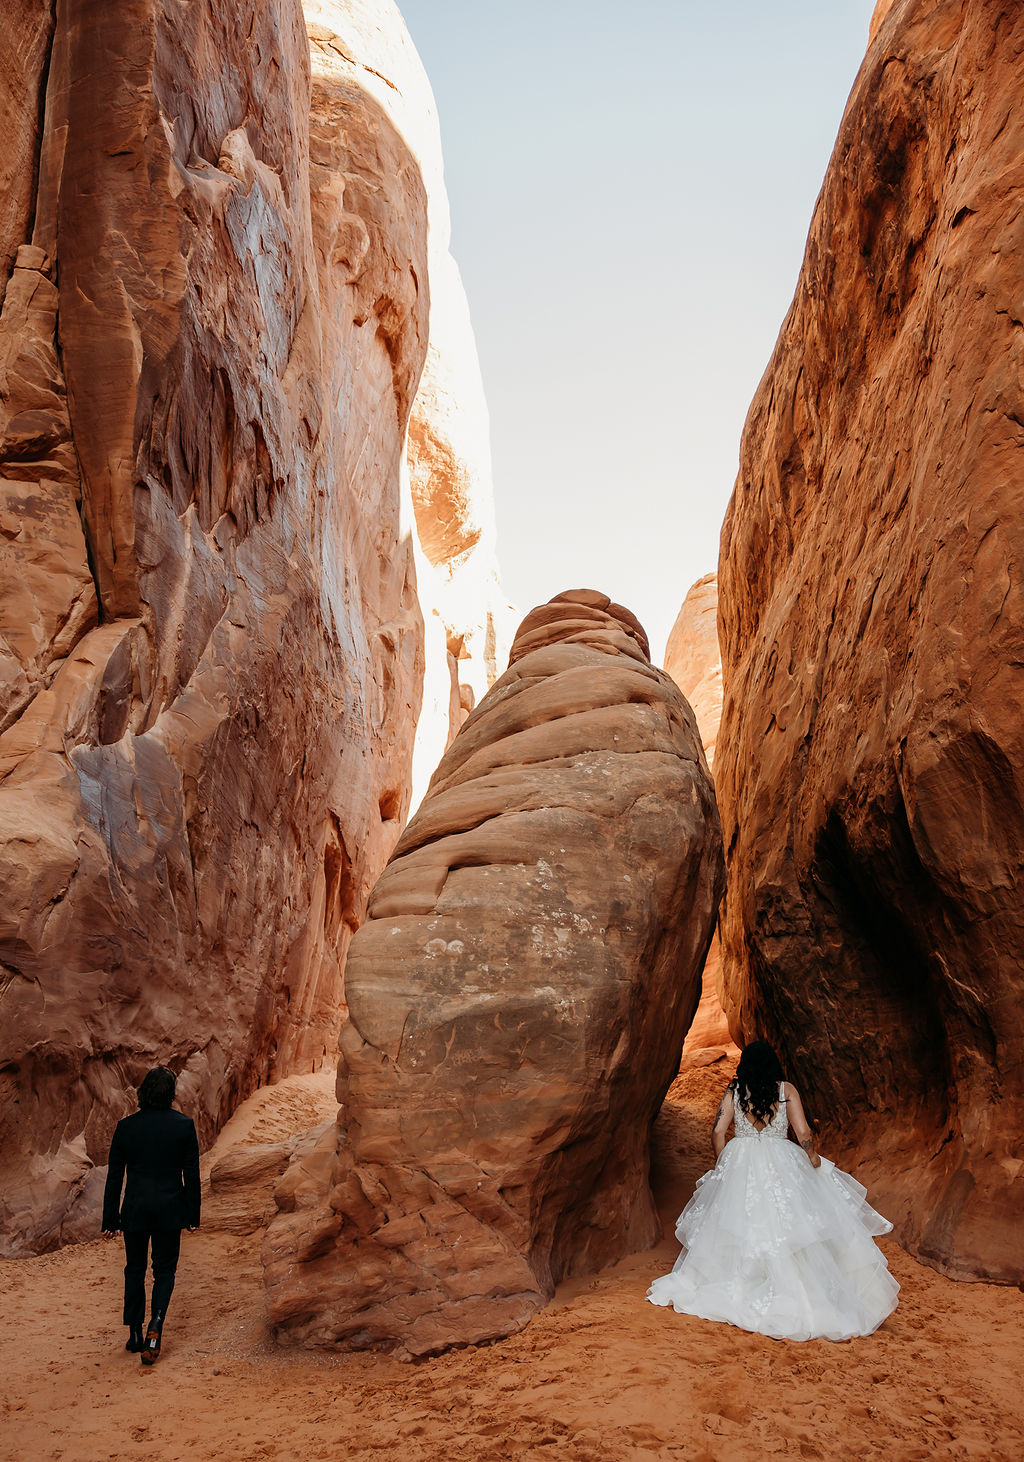 A bride and groom walk through a narrow canyon with towering red rock walls at Arches National Park | PHOTOGRAPHY BY BROGAN |  5 REASONS TO HAVE A MOAB NATIONAL PARK ELOPEMENT 